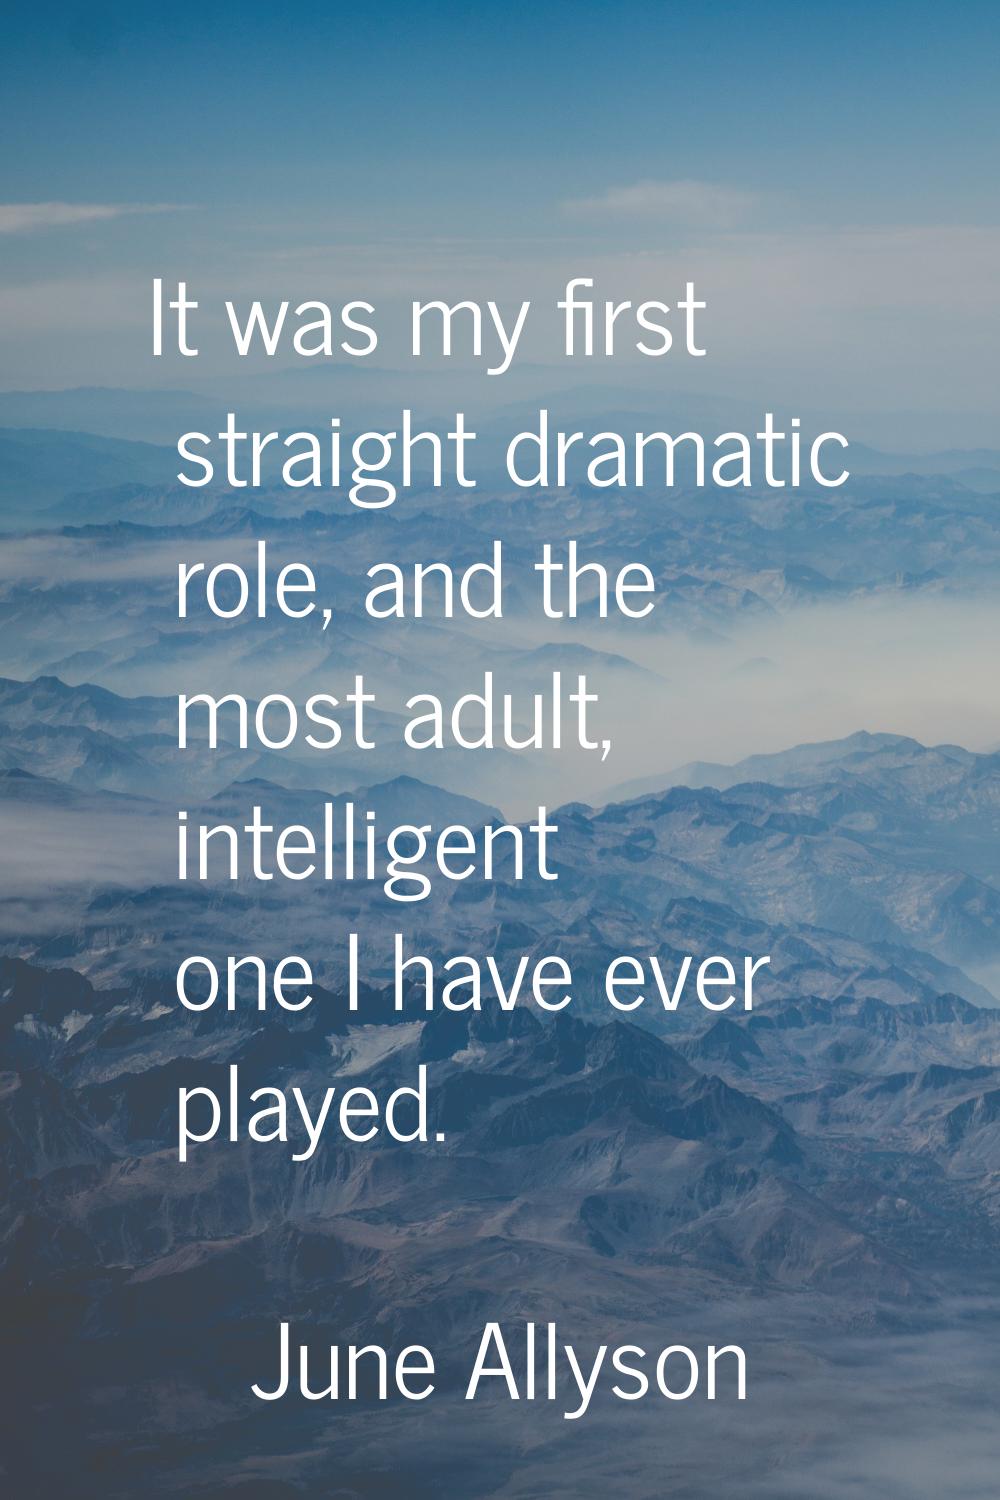 It was my first straight dramatic role, and the most adult, intelligent one I have ever played.